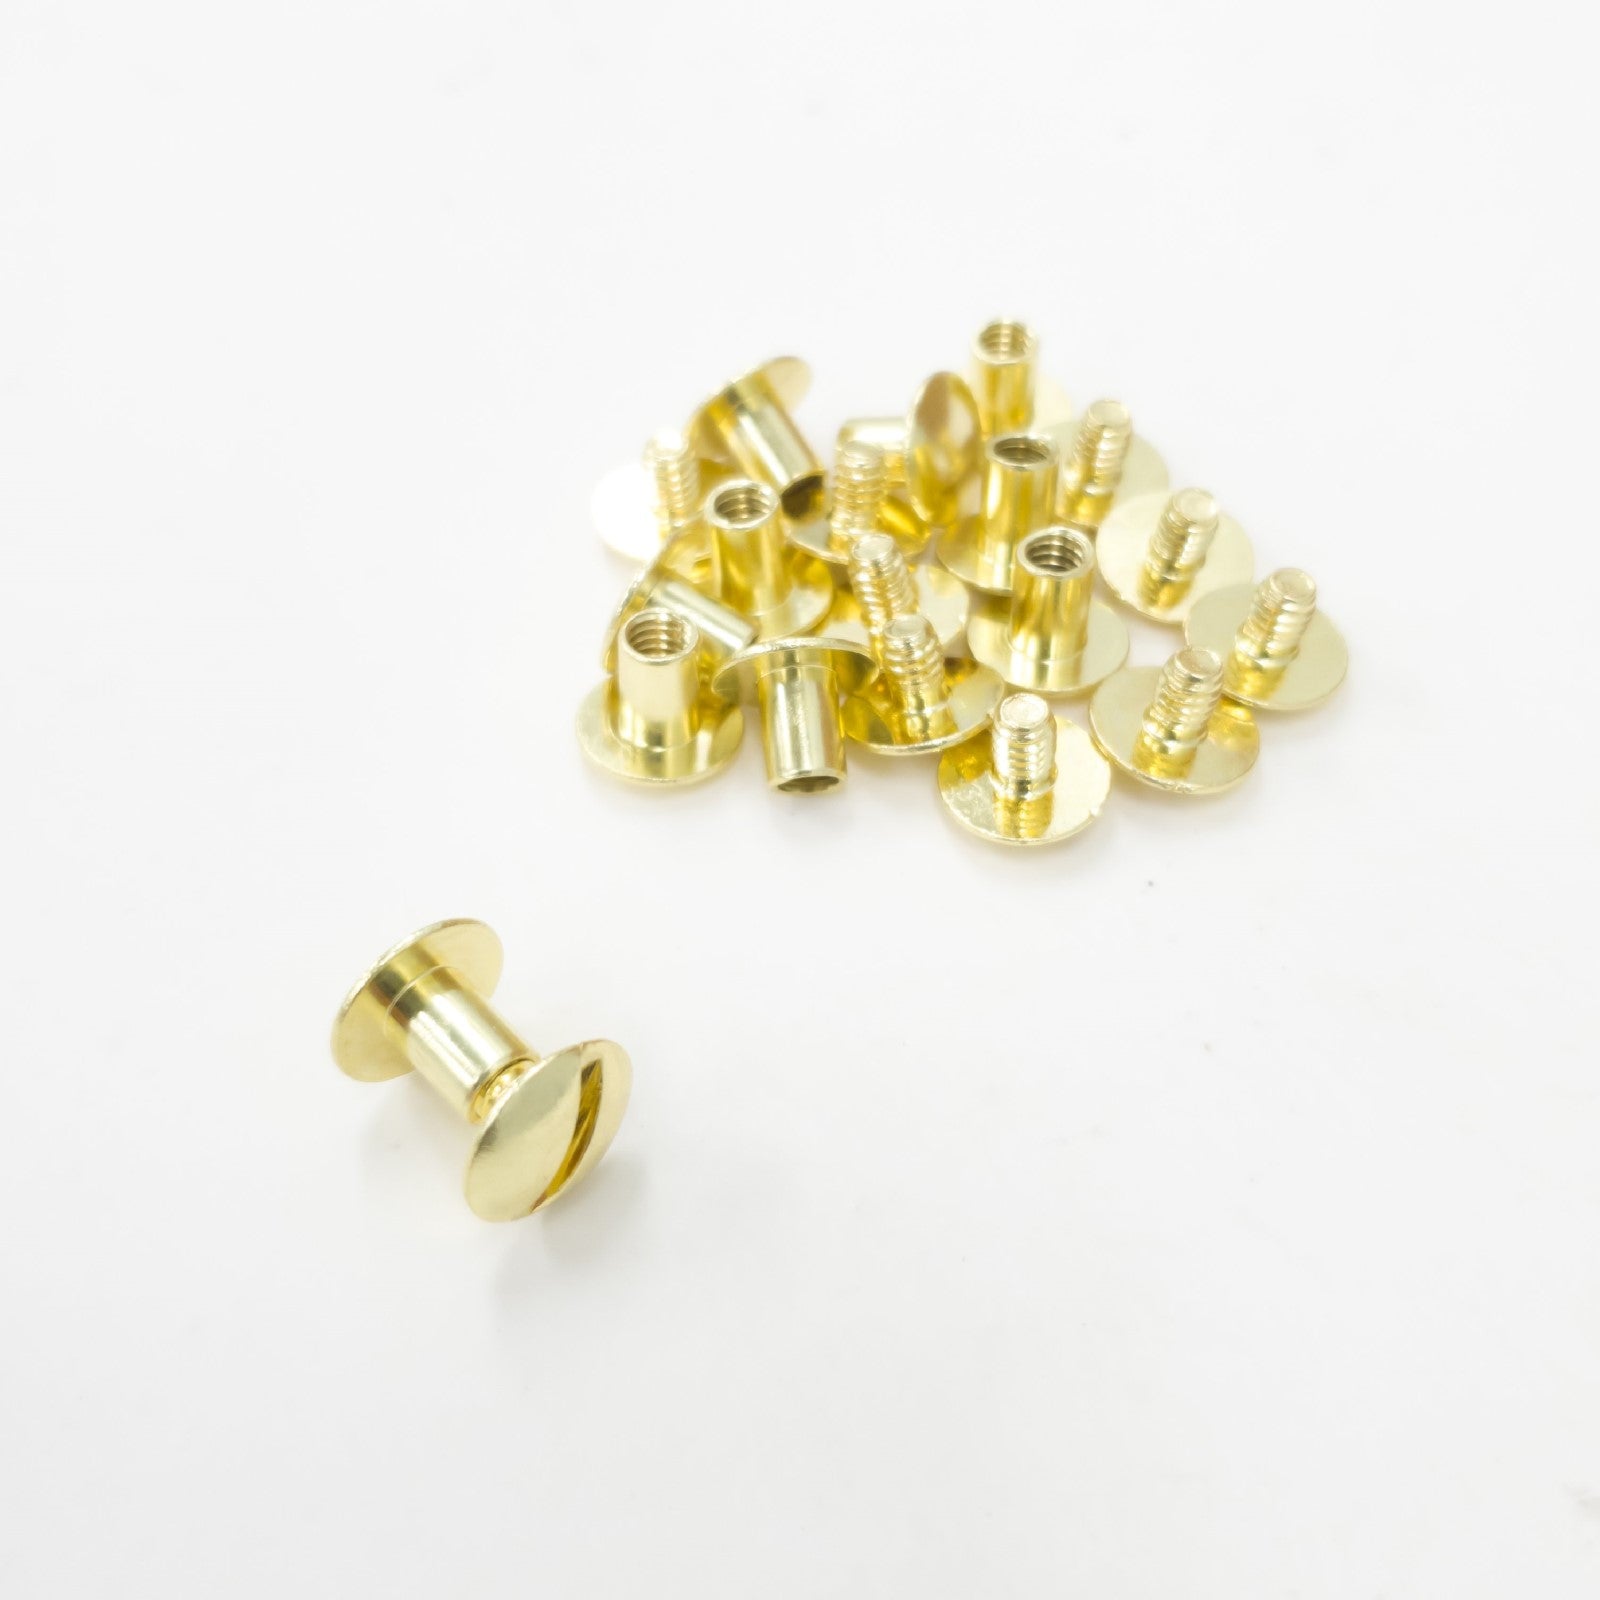 Chicago Screws, 6 mm/ 1/4", Brass / 10 Pack | The Leather Guy